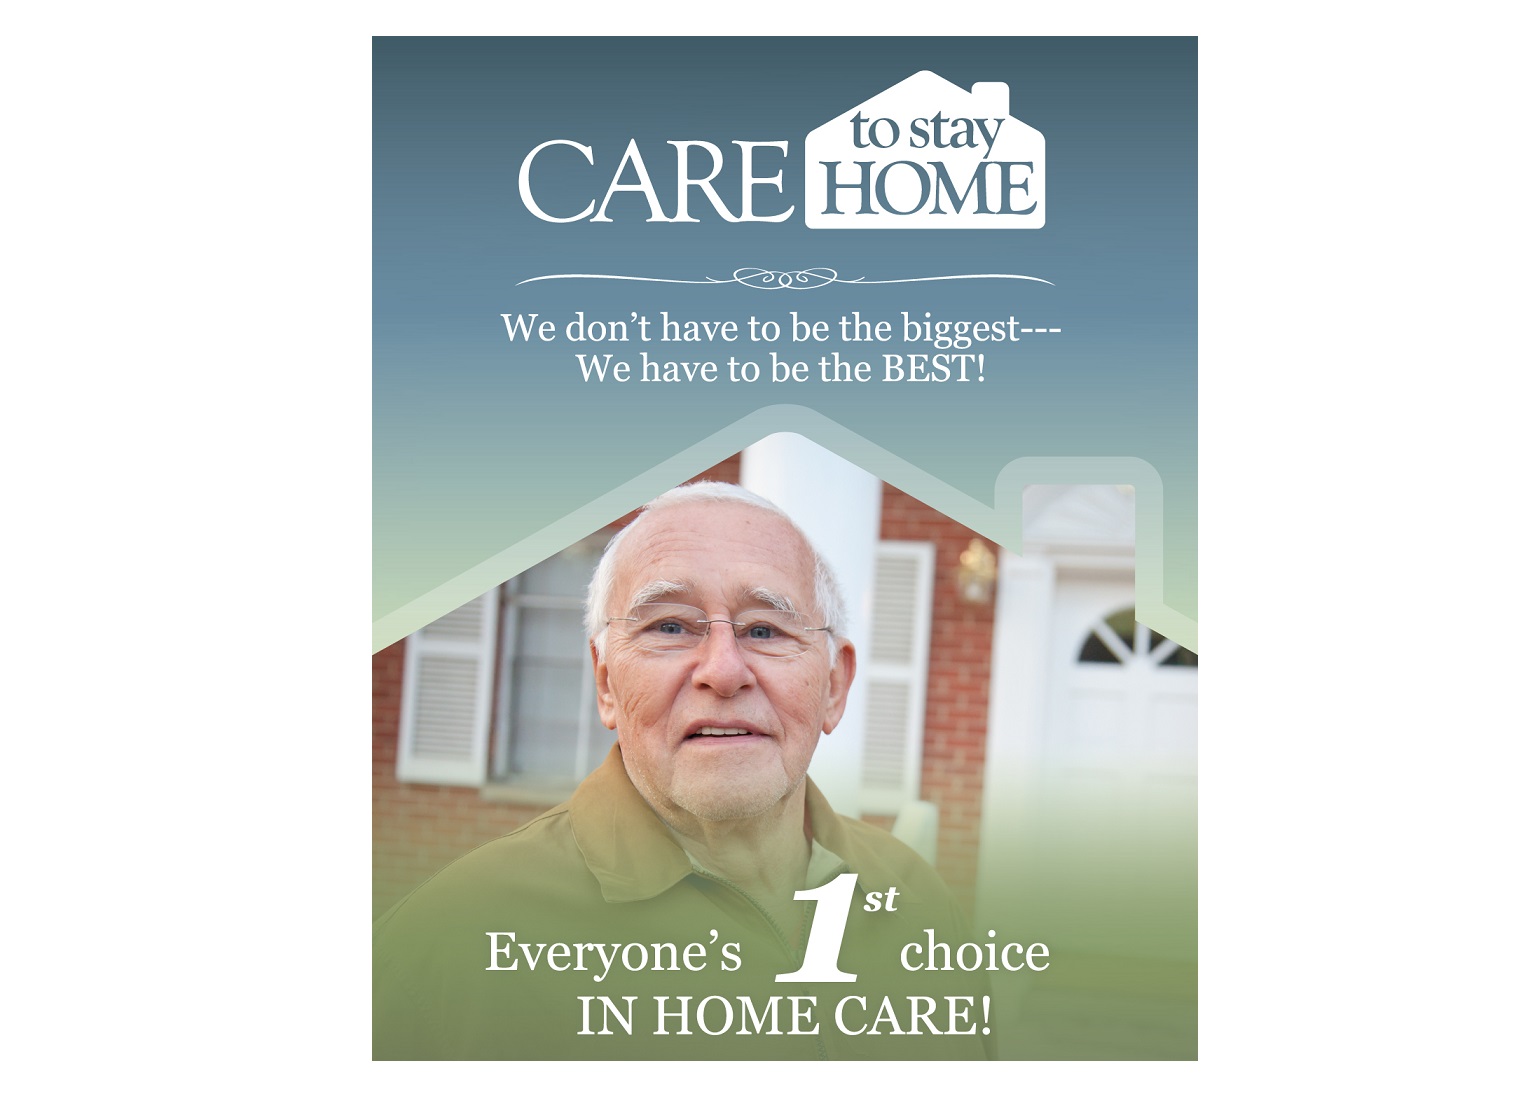 Care to Stay Home image